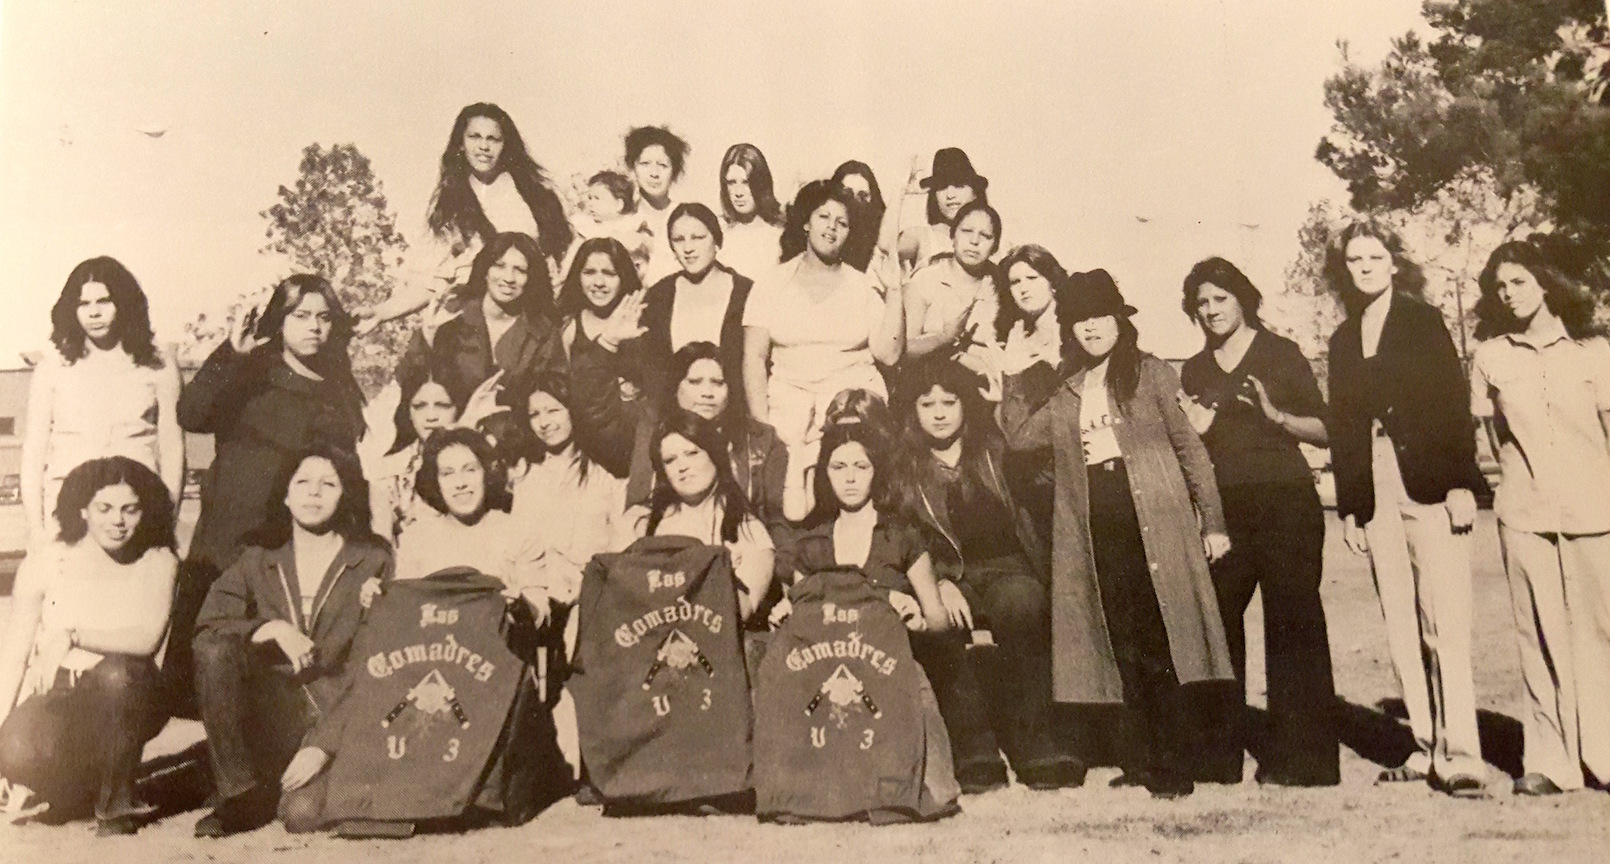 Marianne Diaz with female members of her gang, Las Compadres. This photo was taken before Marianne Diaz’s imprisonment and during her peak as a gang member. Photo credit: Lowrider Magazine. Photo courtesy of Marianne Diaz.